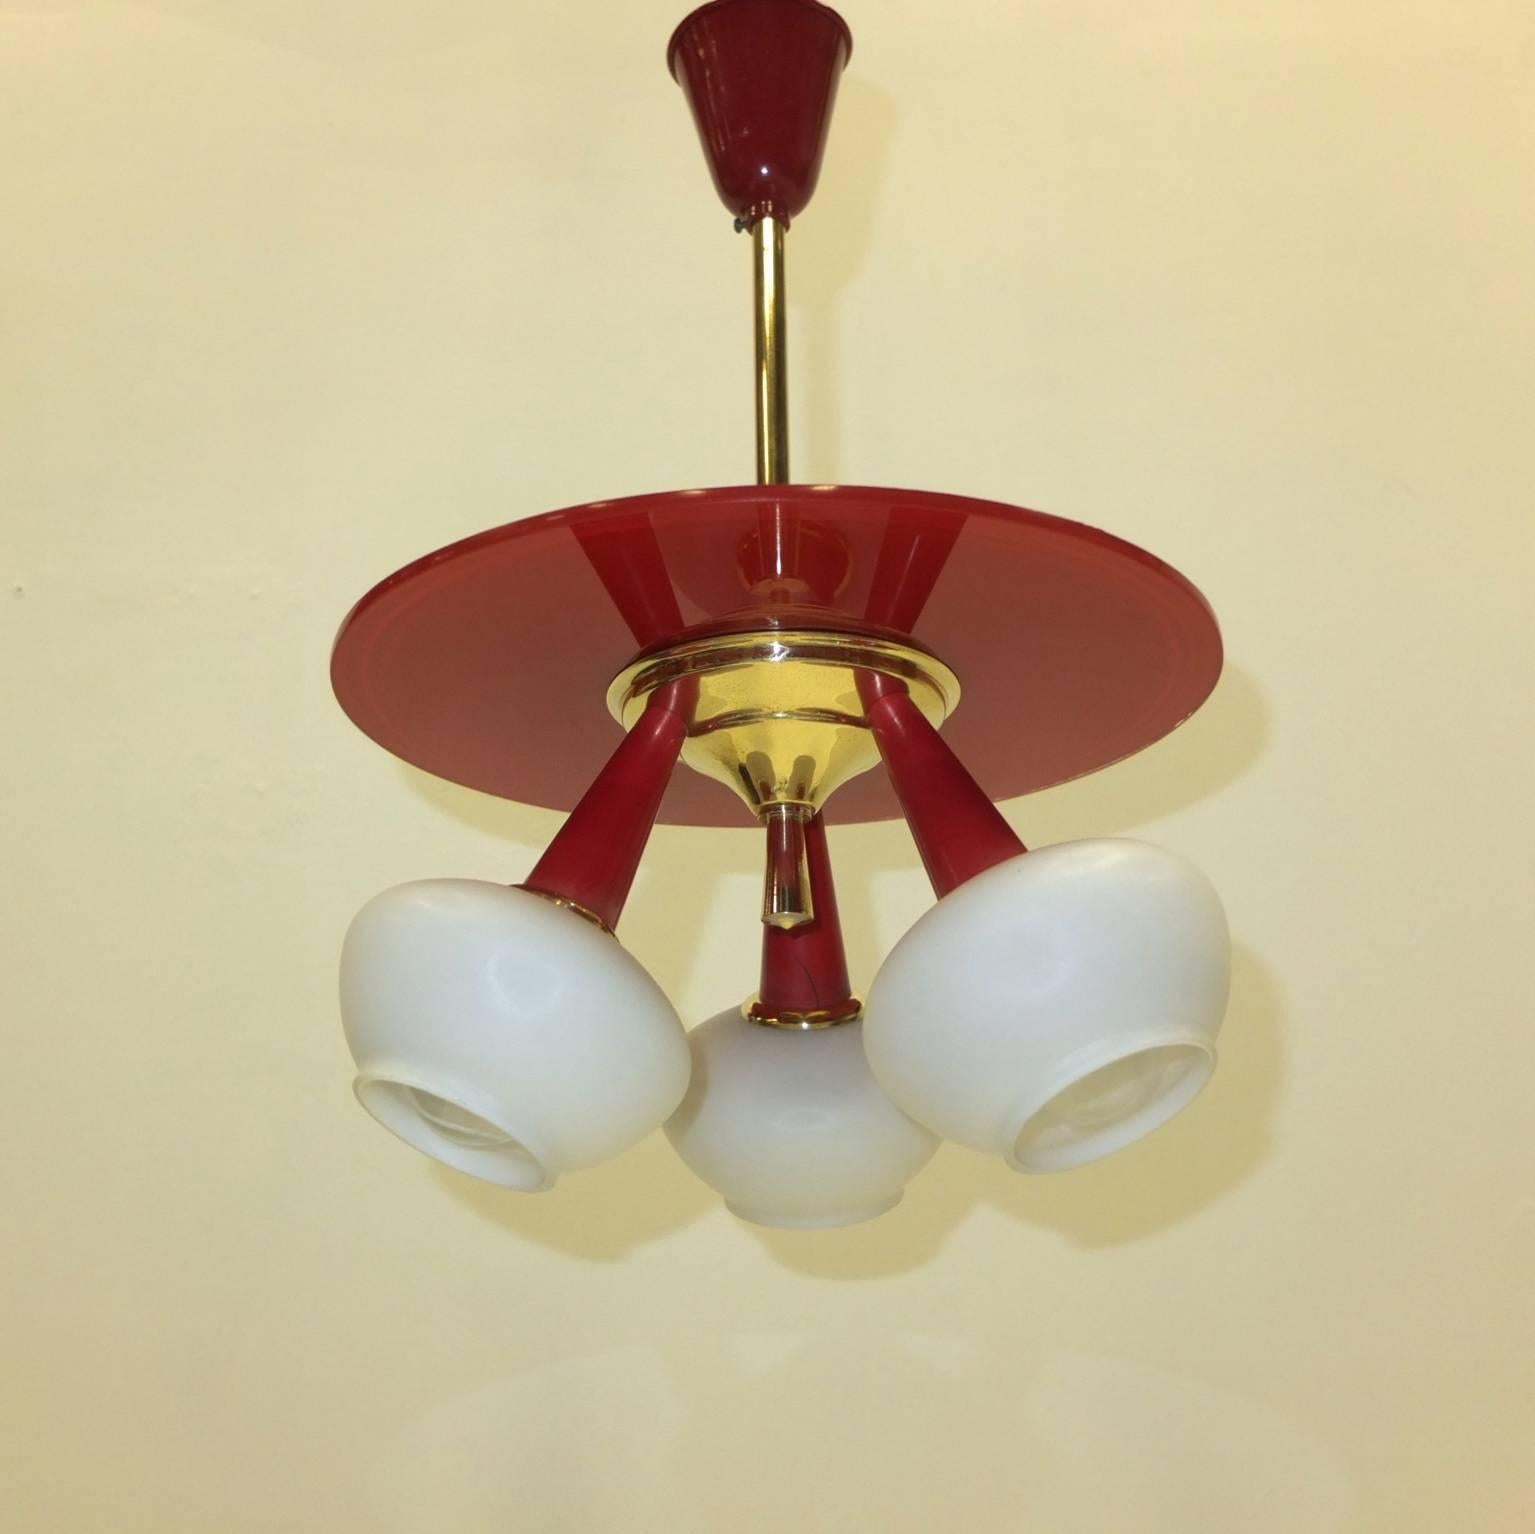 Petite 1950s Italian chandelier in the style of Arredoluce with three inverted red cones with white opaline glass globes and a reverse painted red glass disk and canopy.

We can lengthen or shorted the drop rod.

Takes three 60 watt candelabra